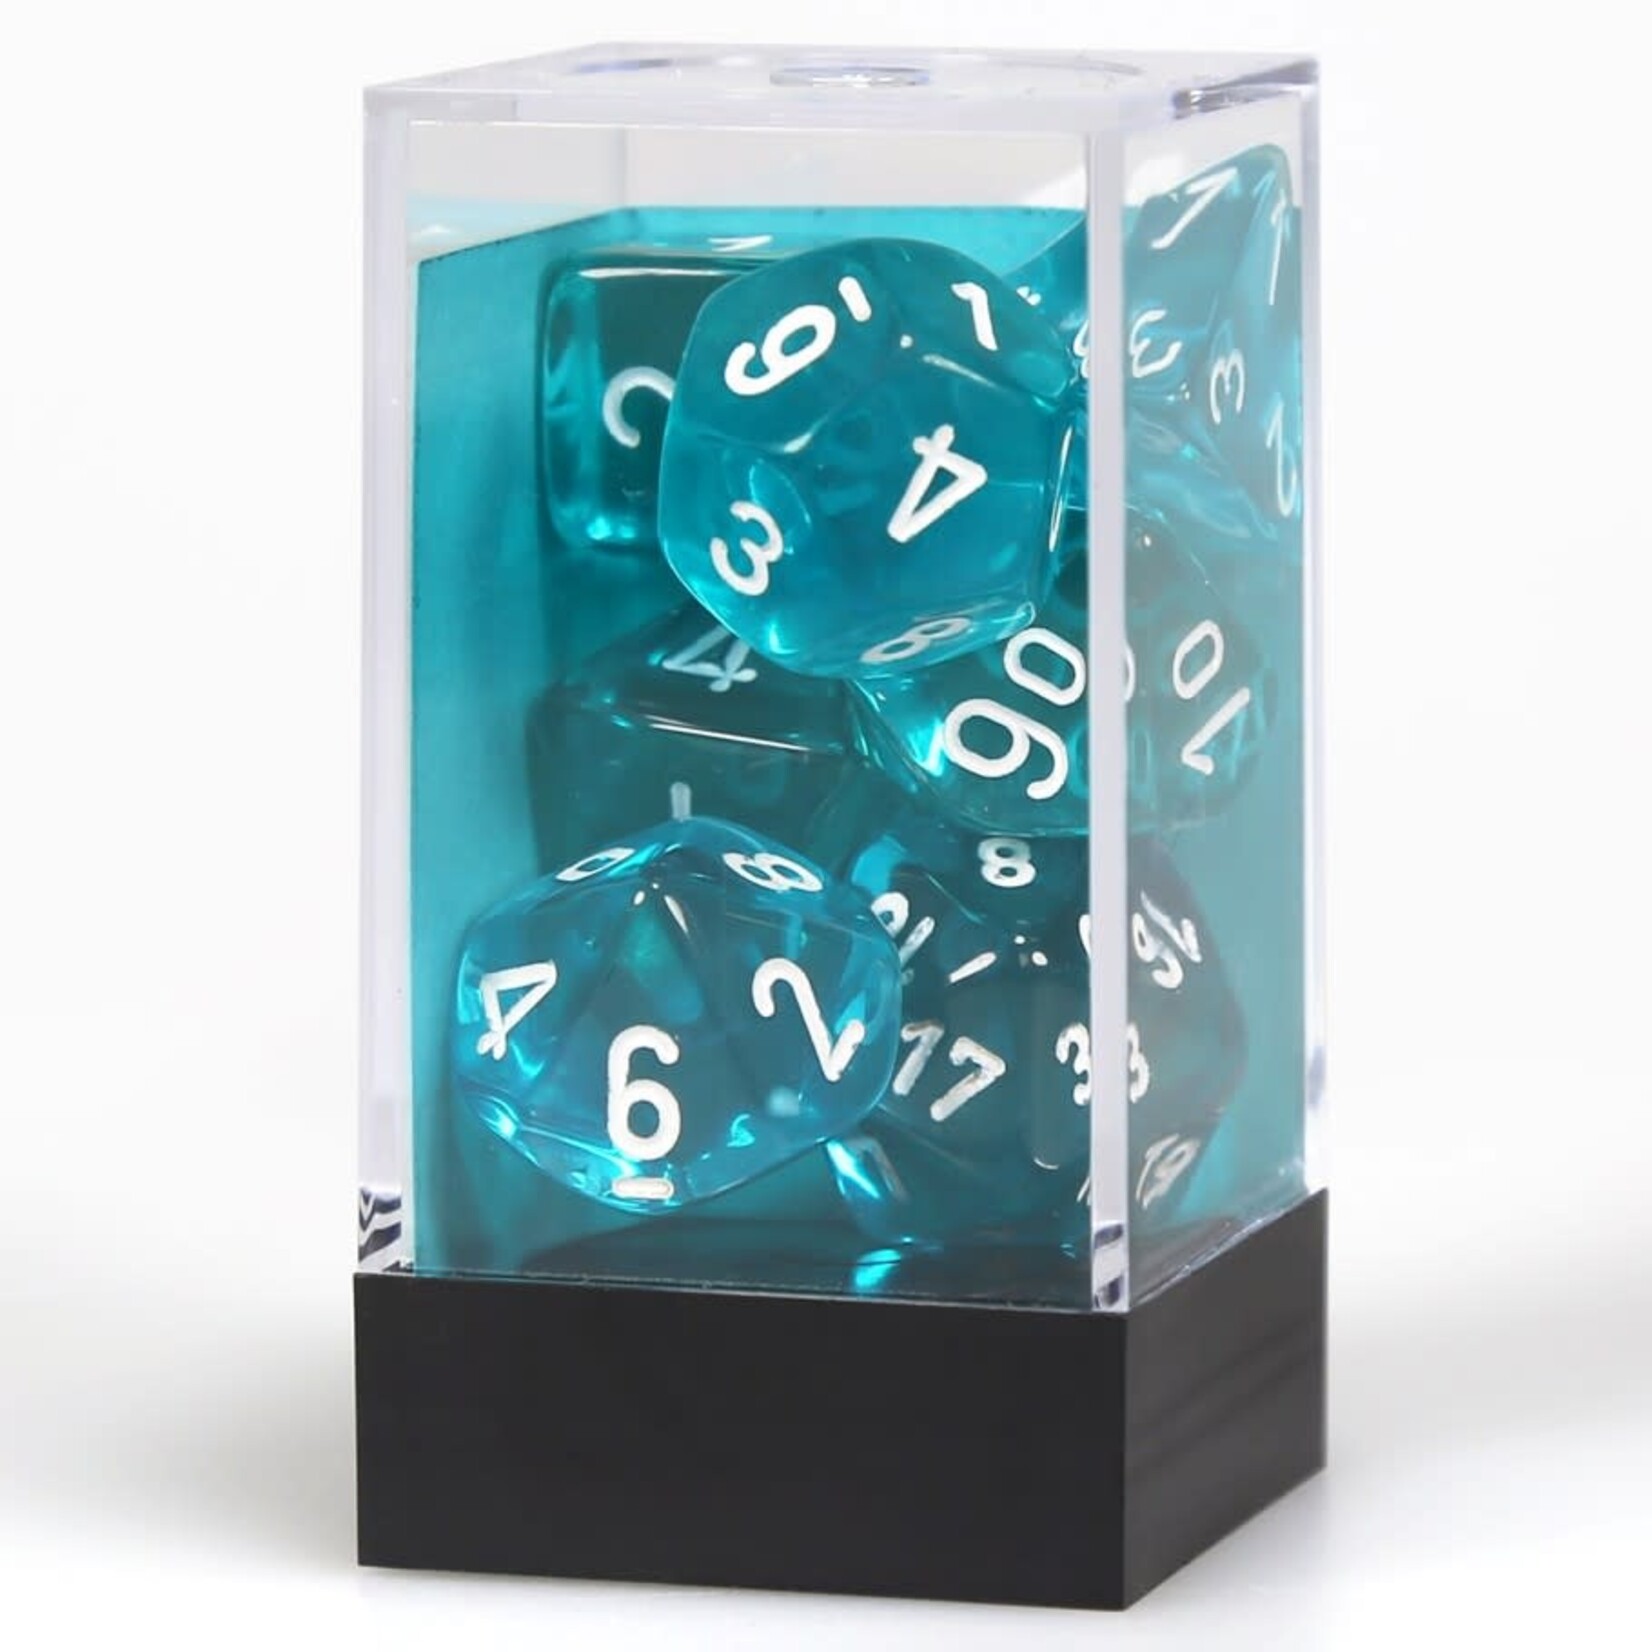 Chessex Translucent Polyhedral 7-Die Set: Teal with white